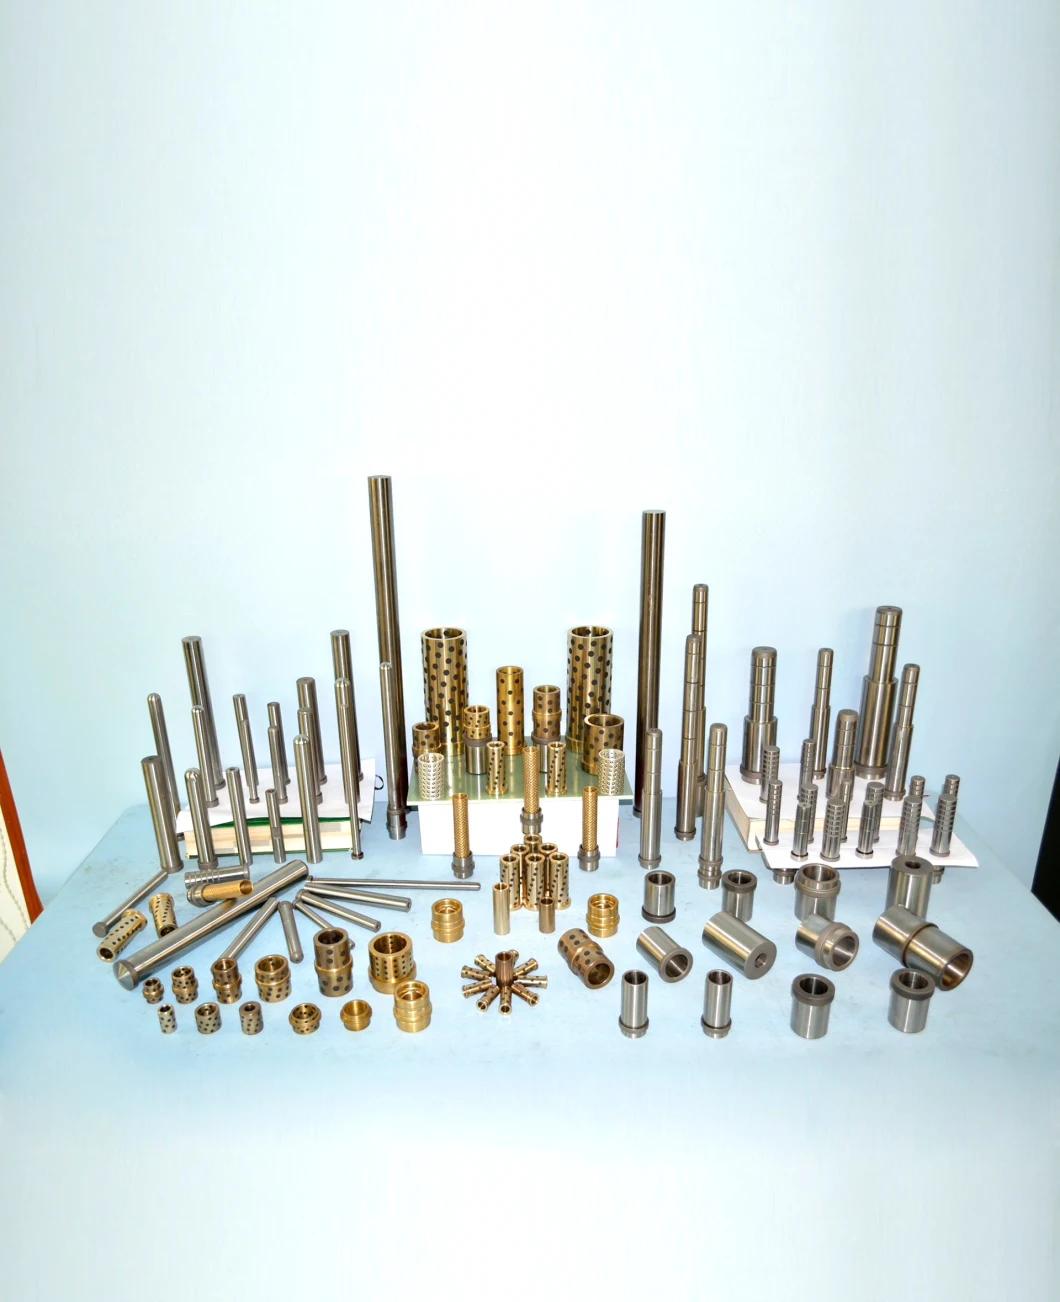 Wmould High Quality JIS Standard Eegbzs Self-Lubricating Guide Bush for Plastic Injection Mould